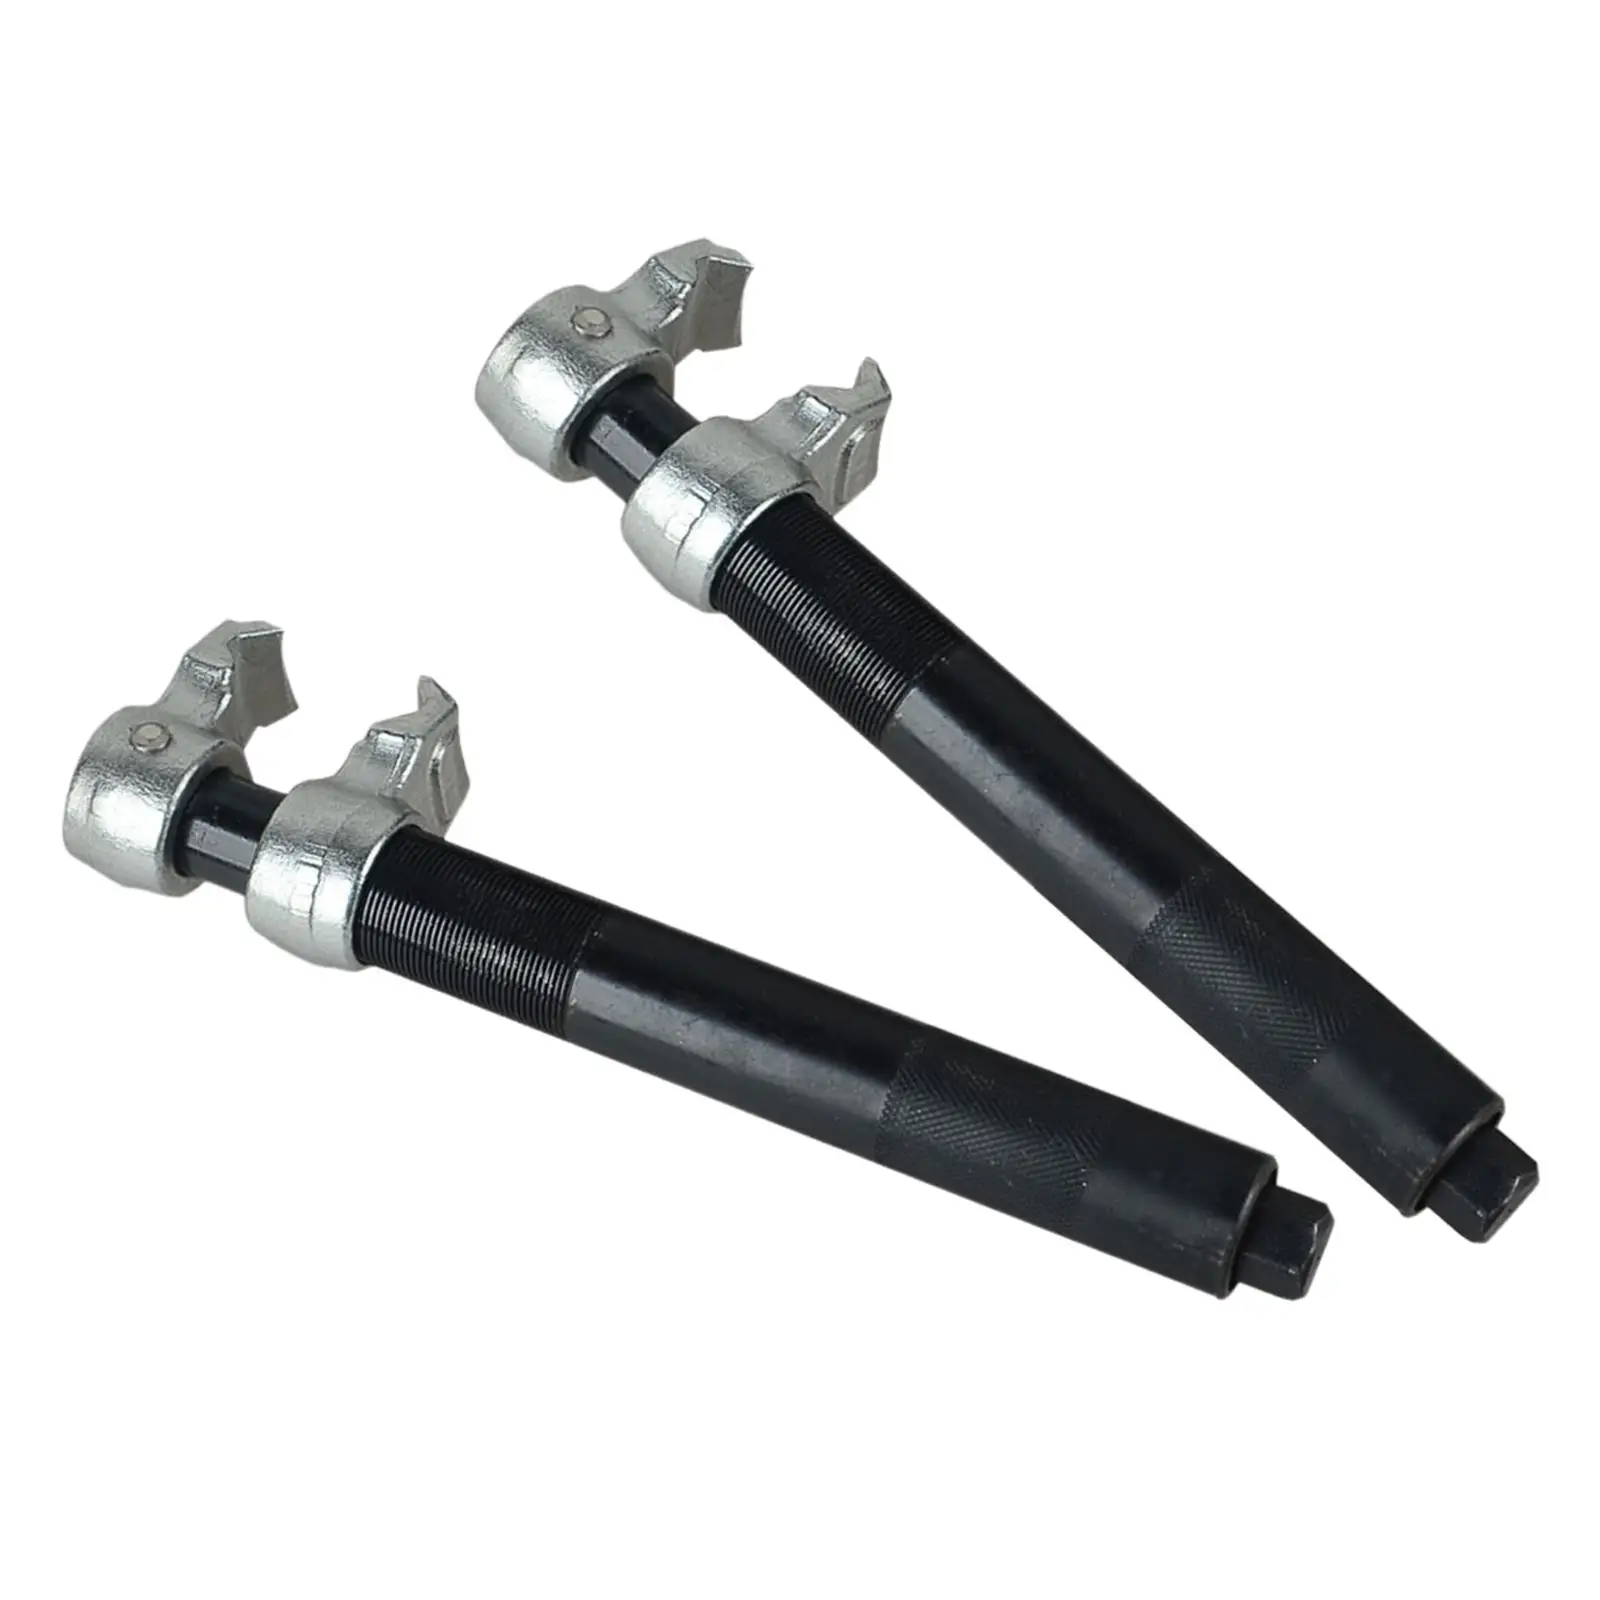 Compressor Adjustable Premium with 2 Steel Jaw Claws Adjuster Tool Spreads or Compresses Lift or Lower Spring Spacer